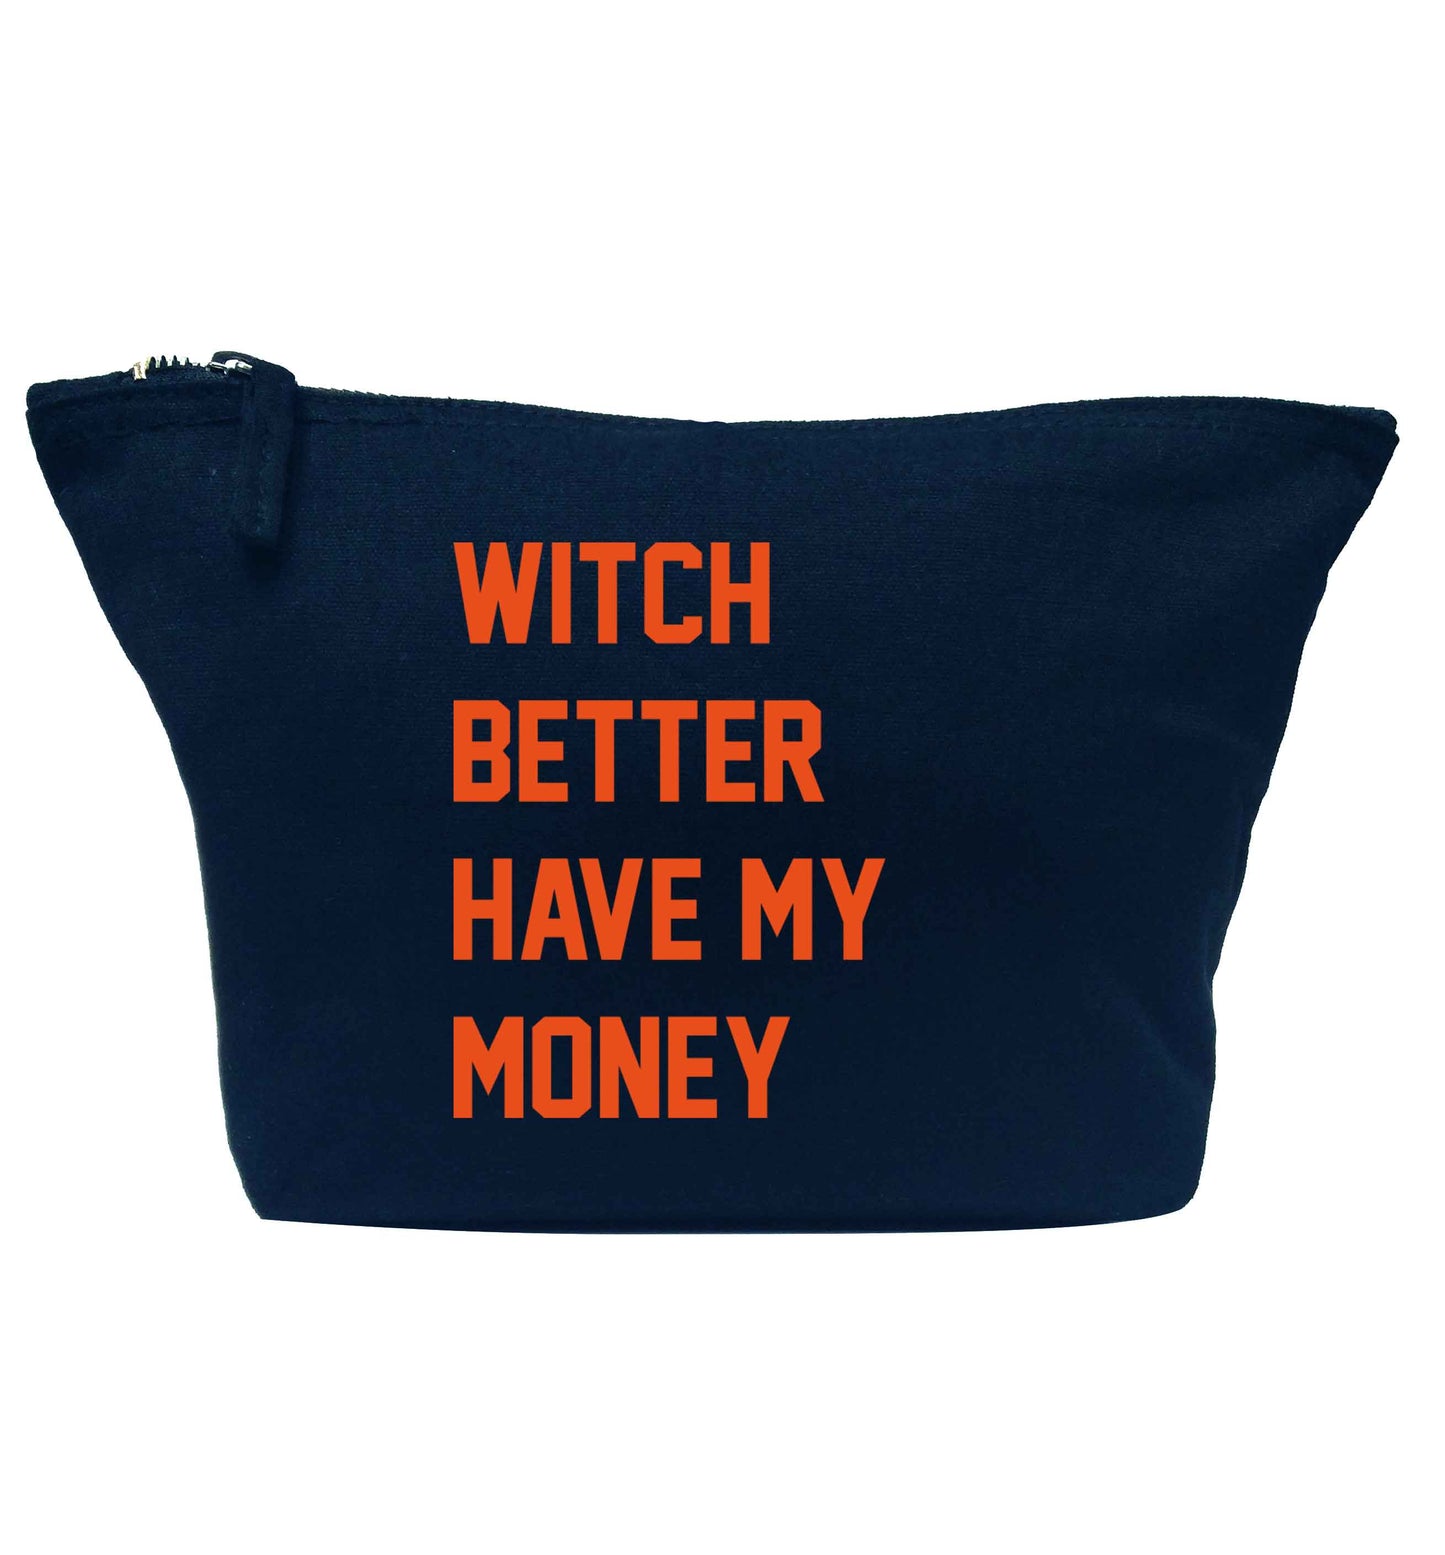 Witch better have my money navy makeup bag